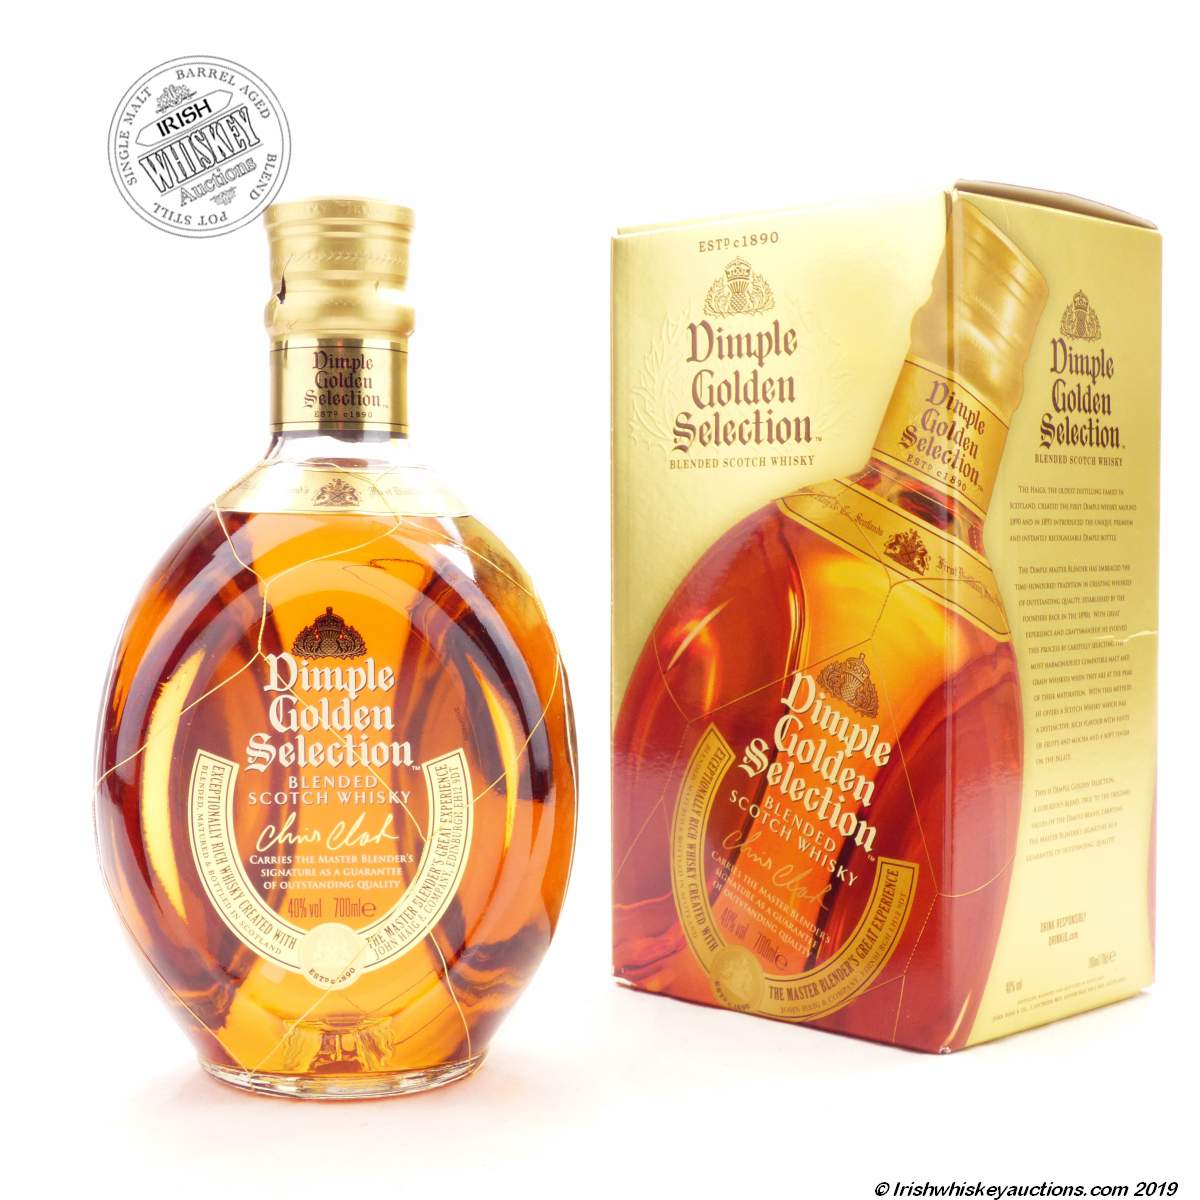 Irish Whiskey Auctions | Dimple Golden Selection Blended Scotch Whisky